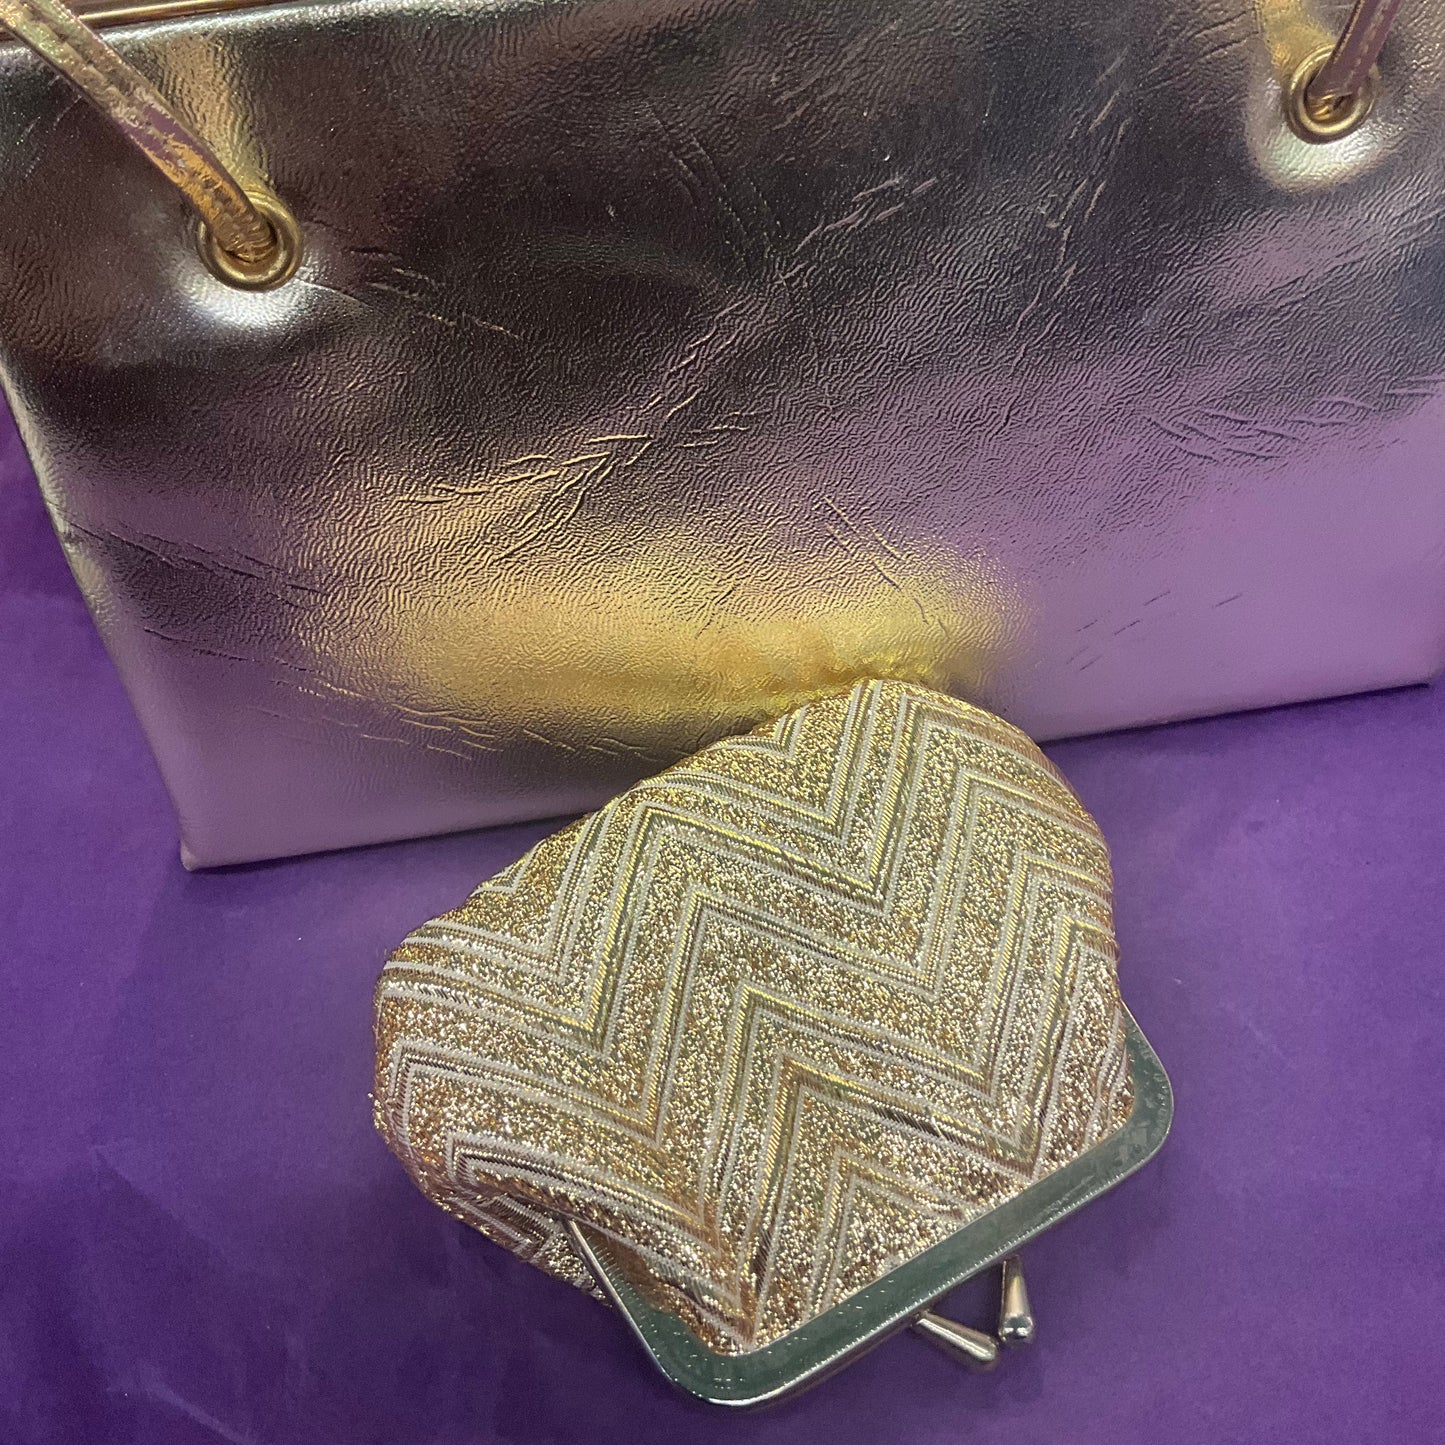 Vintage Gold Faux Leather Evening Bag and Coin Purse